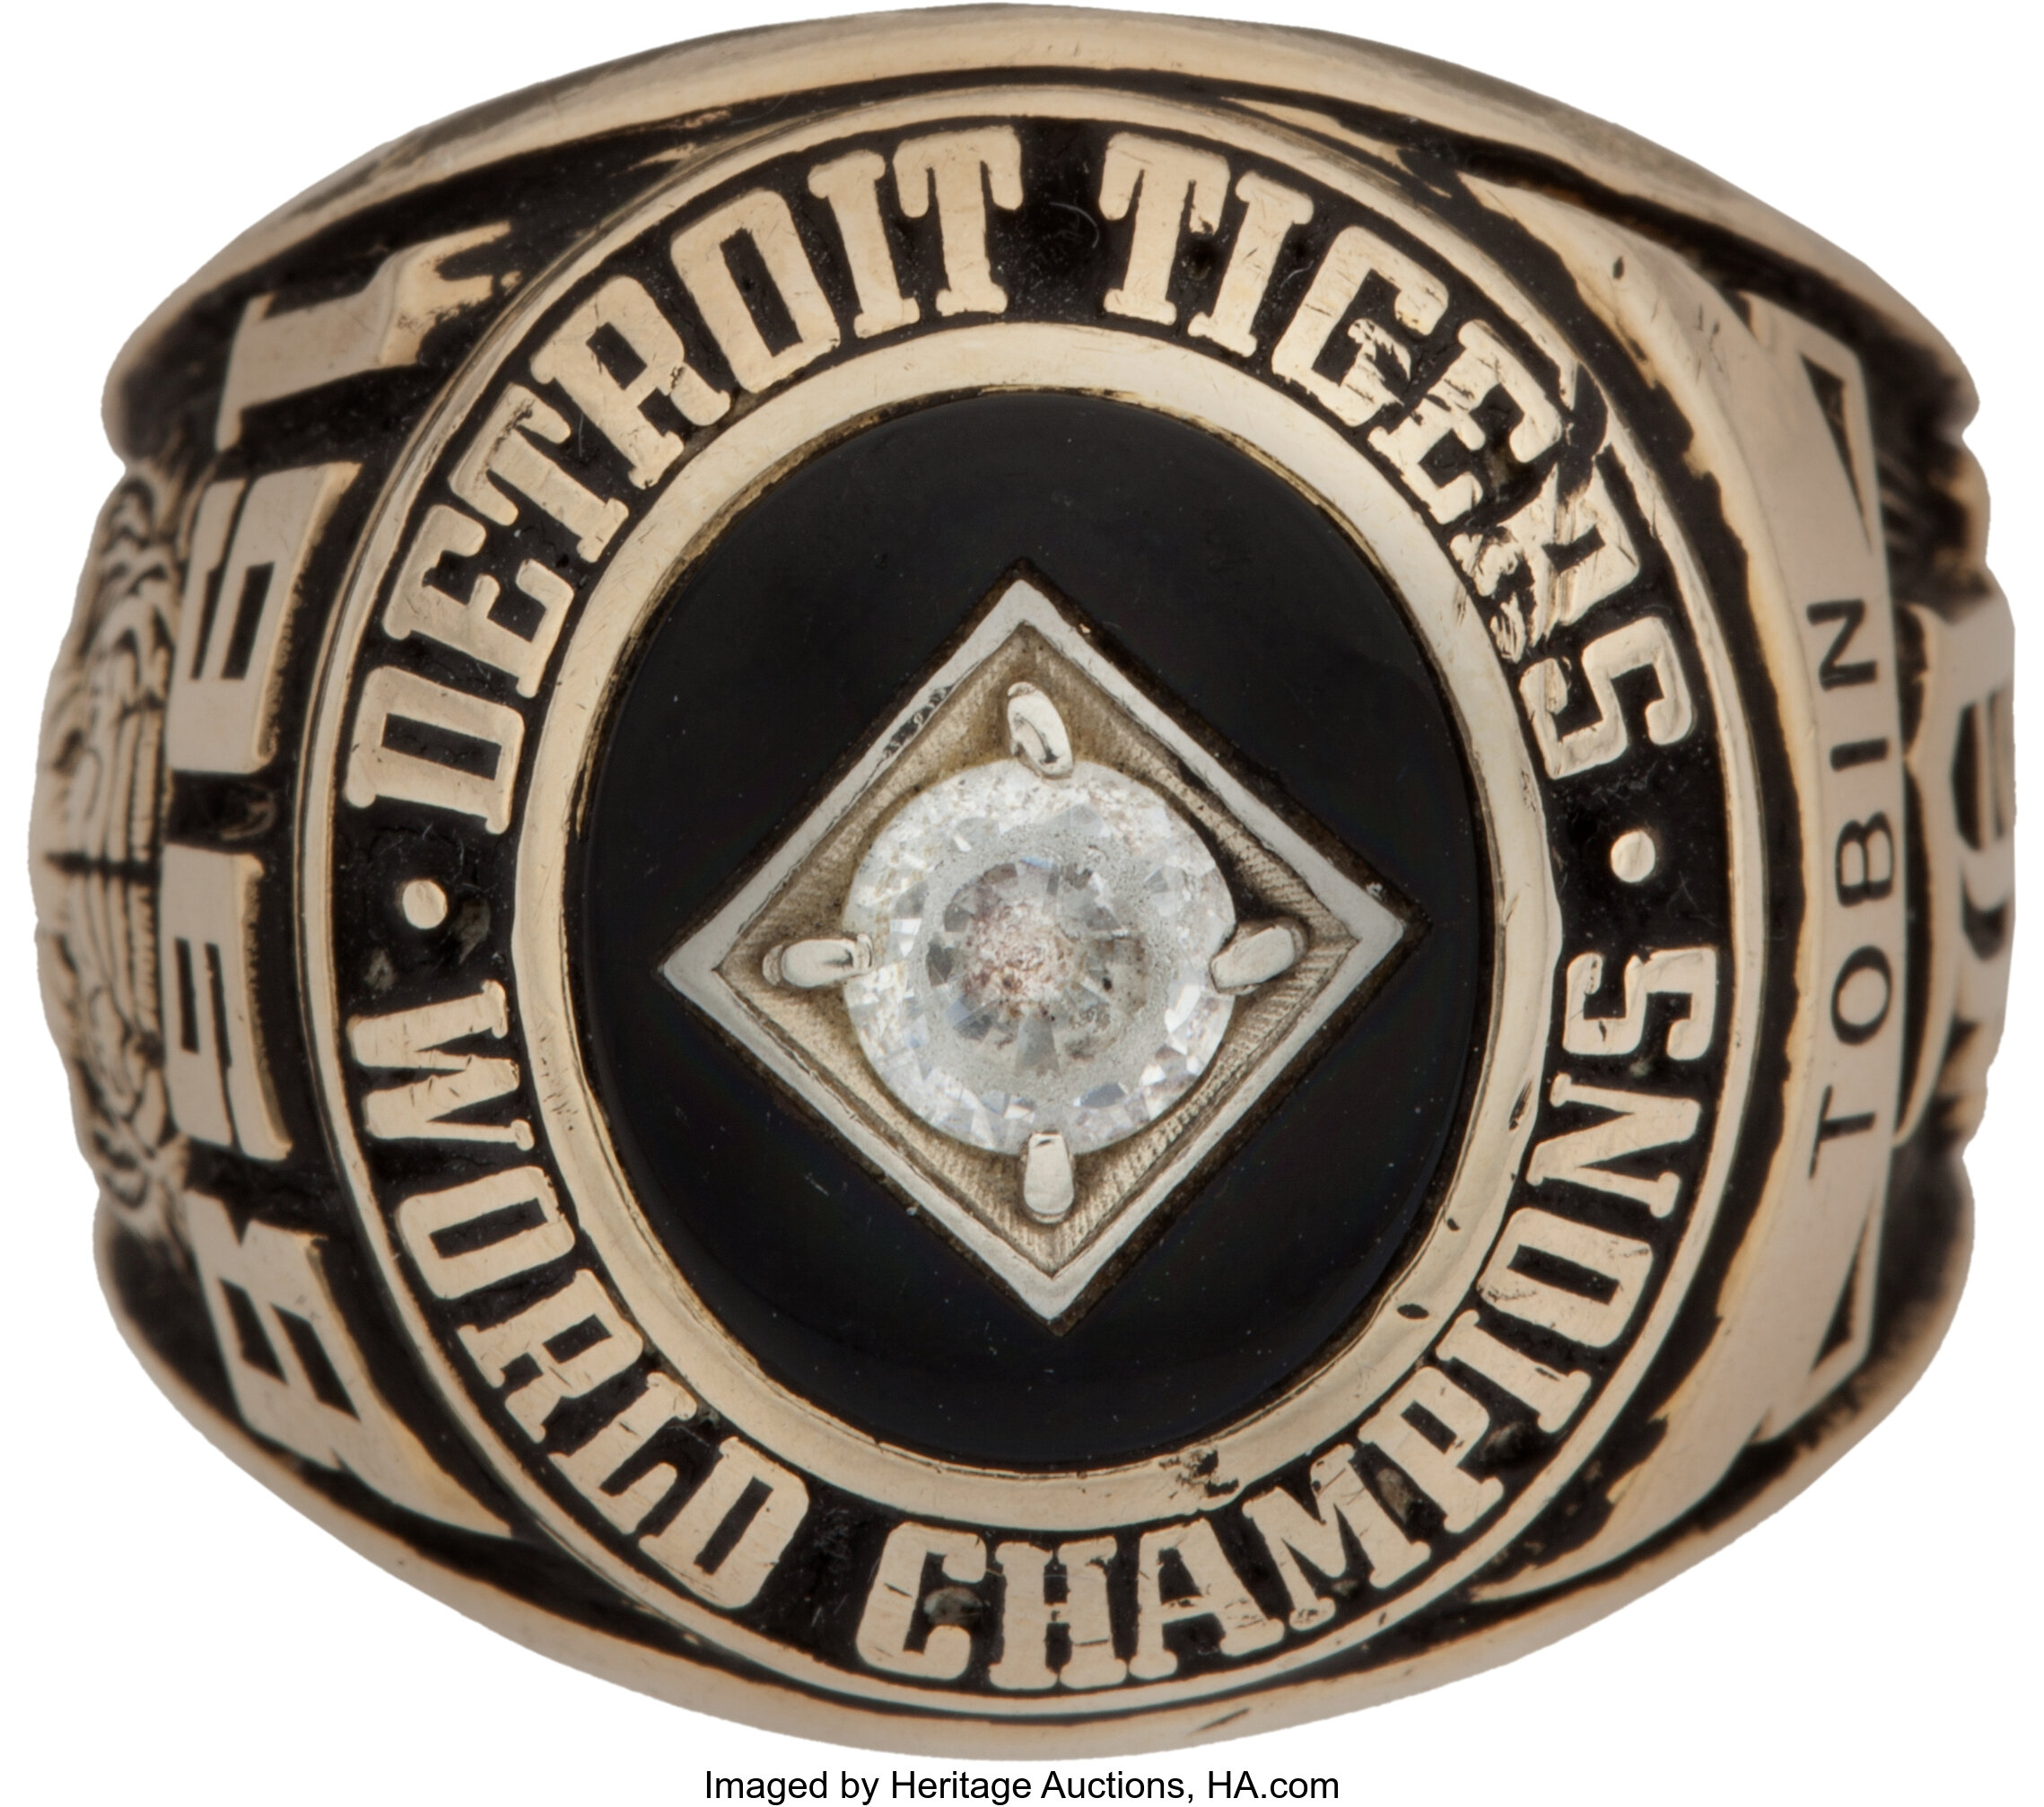 A look back at the 1968 World Series-champion Tigers